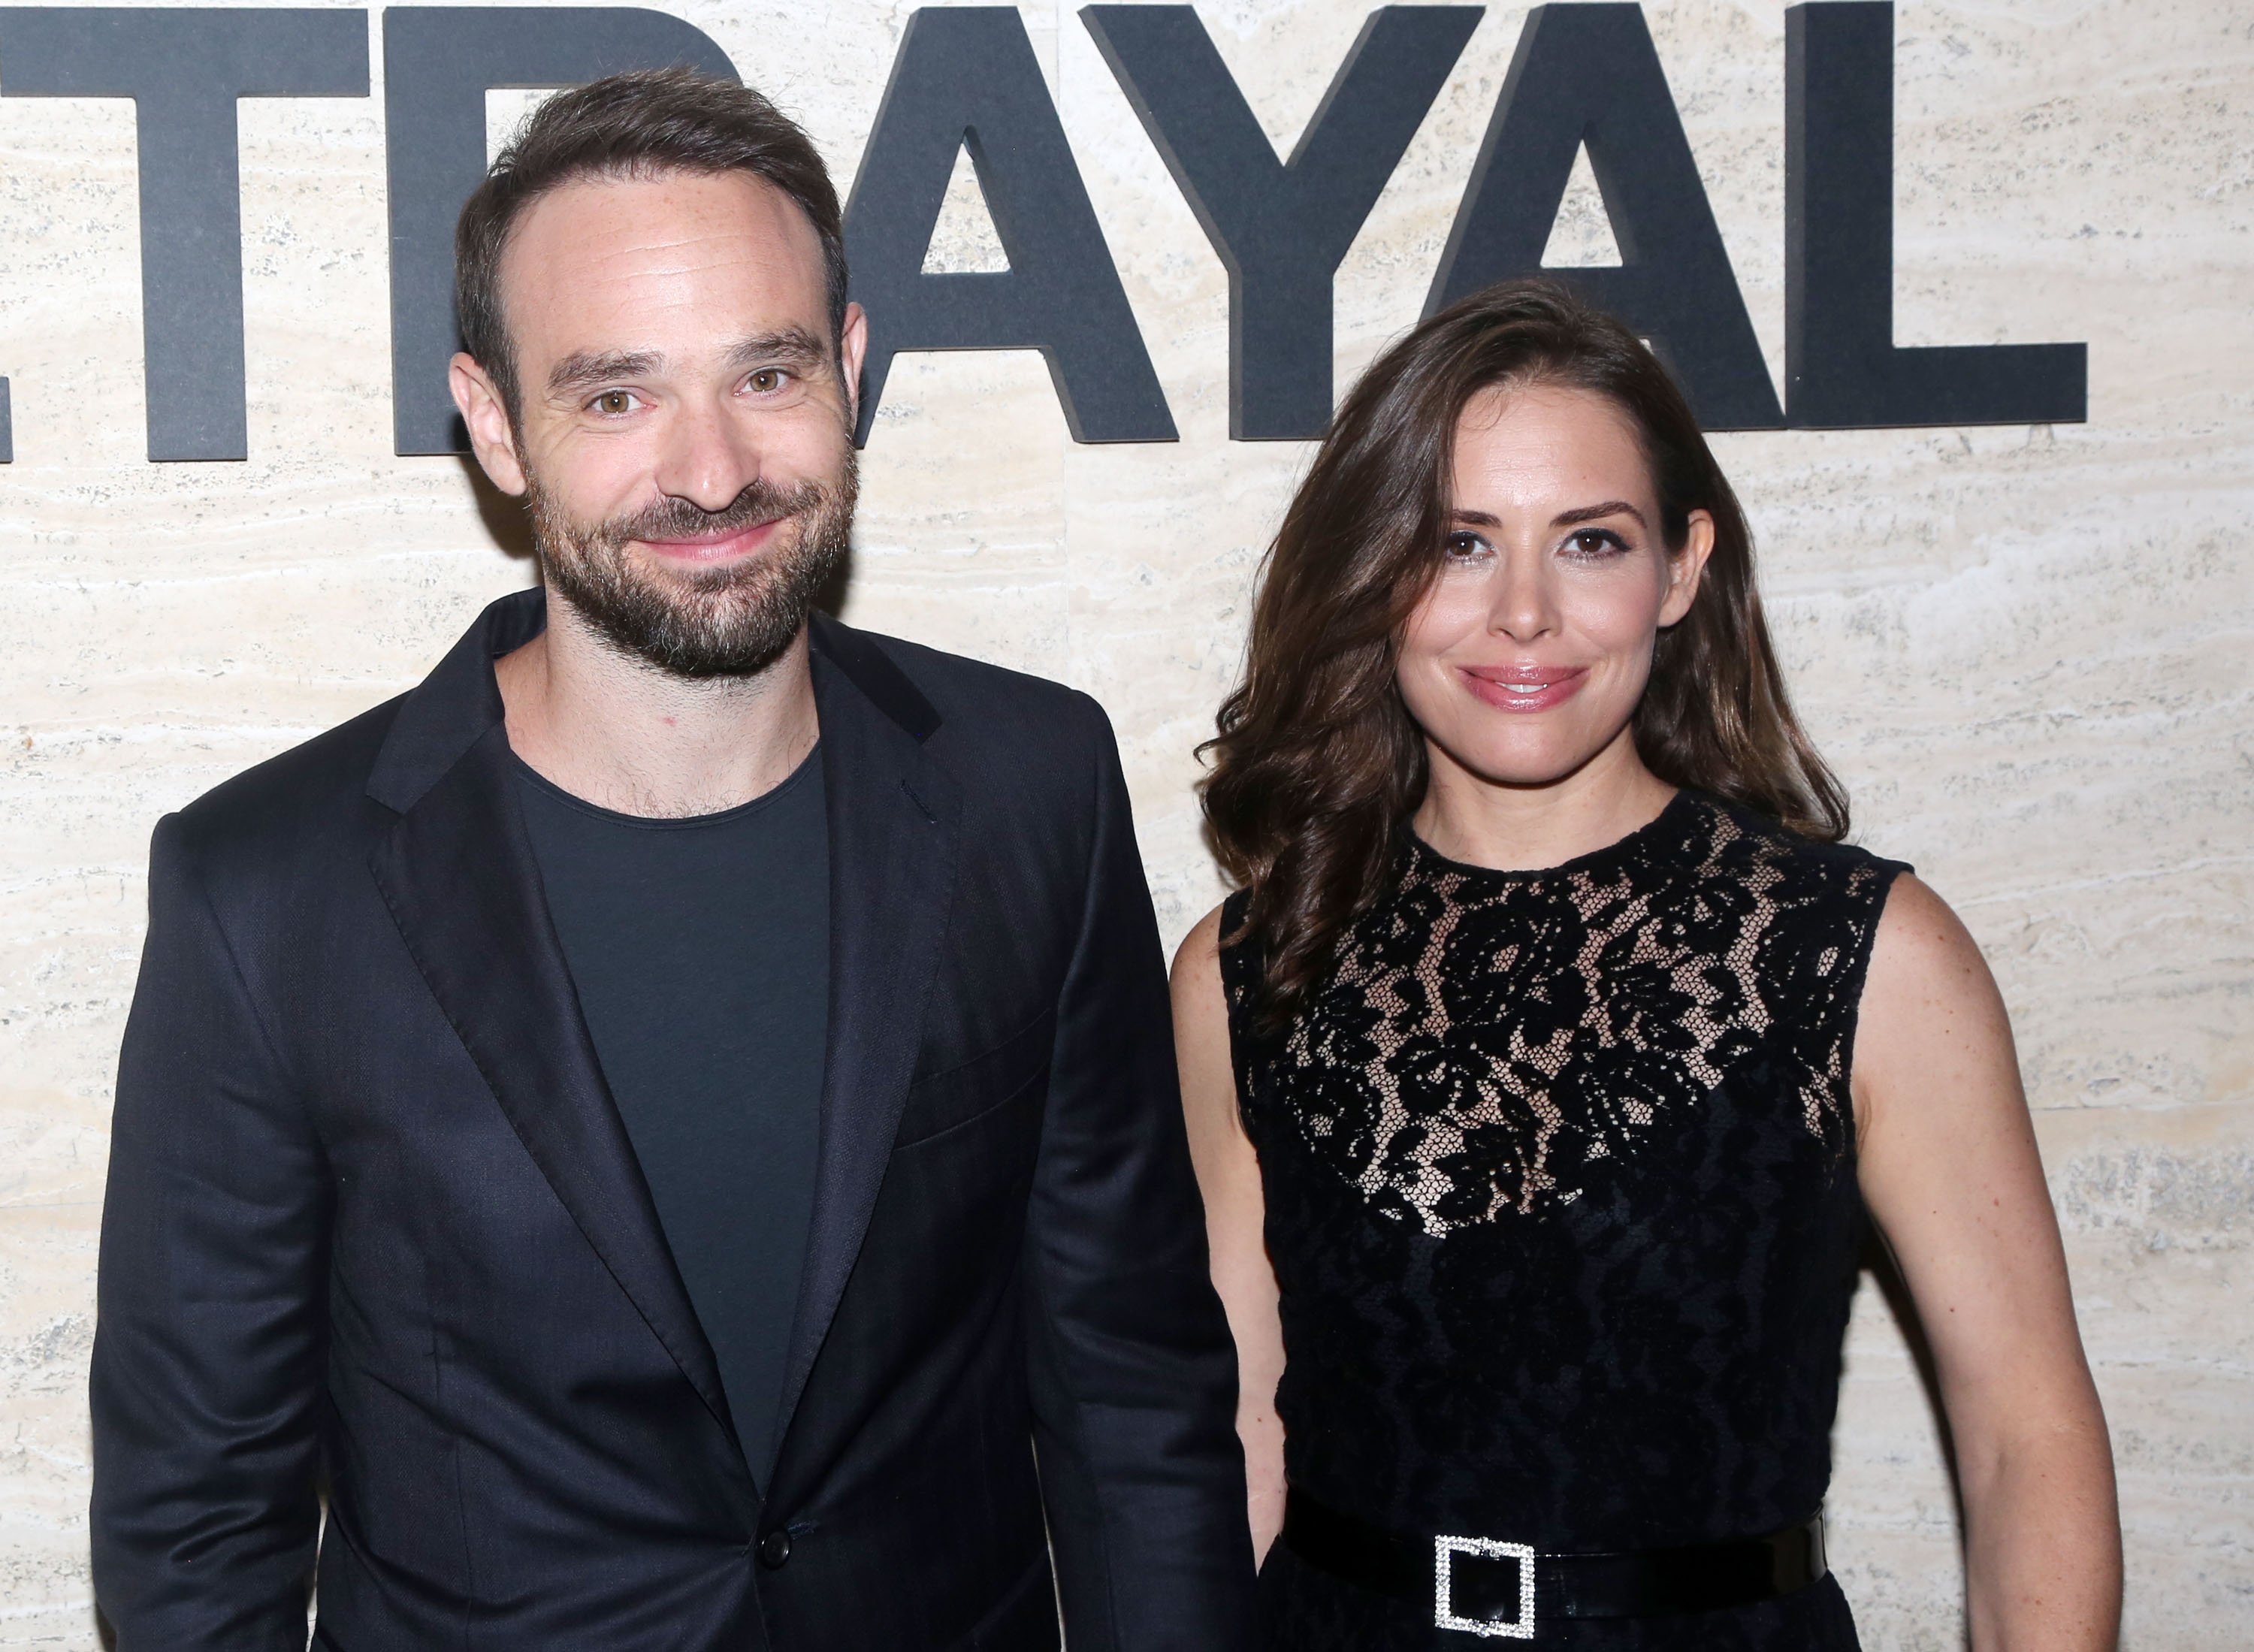 Charlie Cox and his wife Samantha Thomas at the opening night of "Betrayal" on Broadway on September 5, 2019. | Source: Getty Images